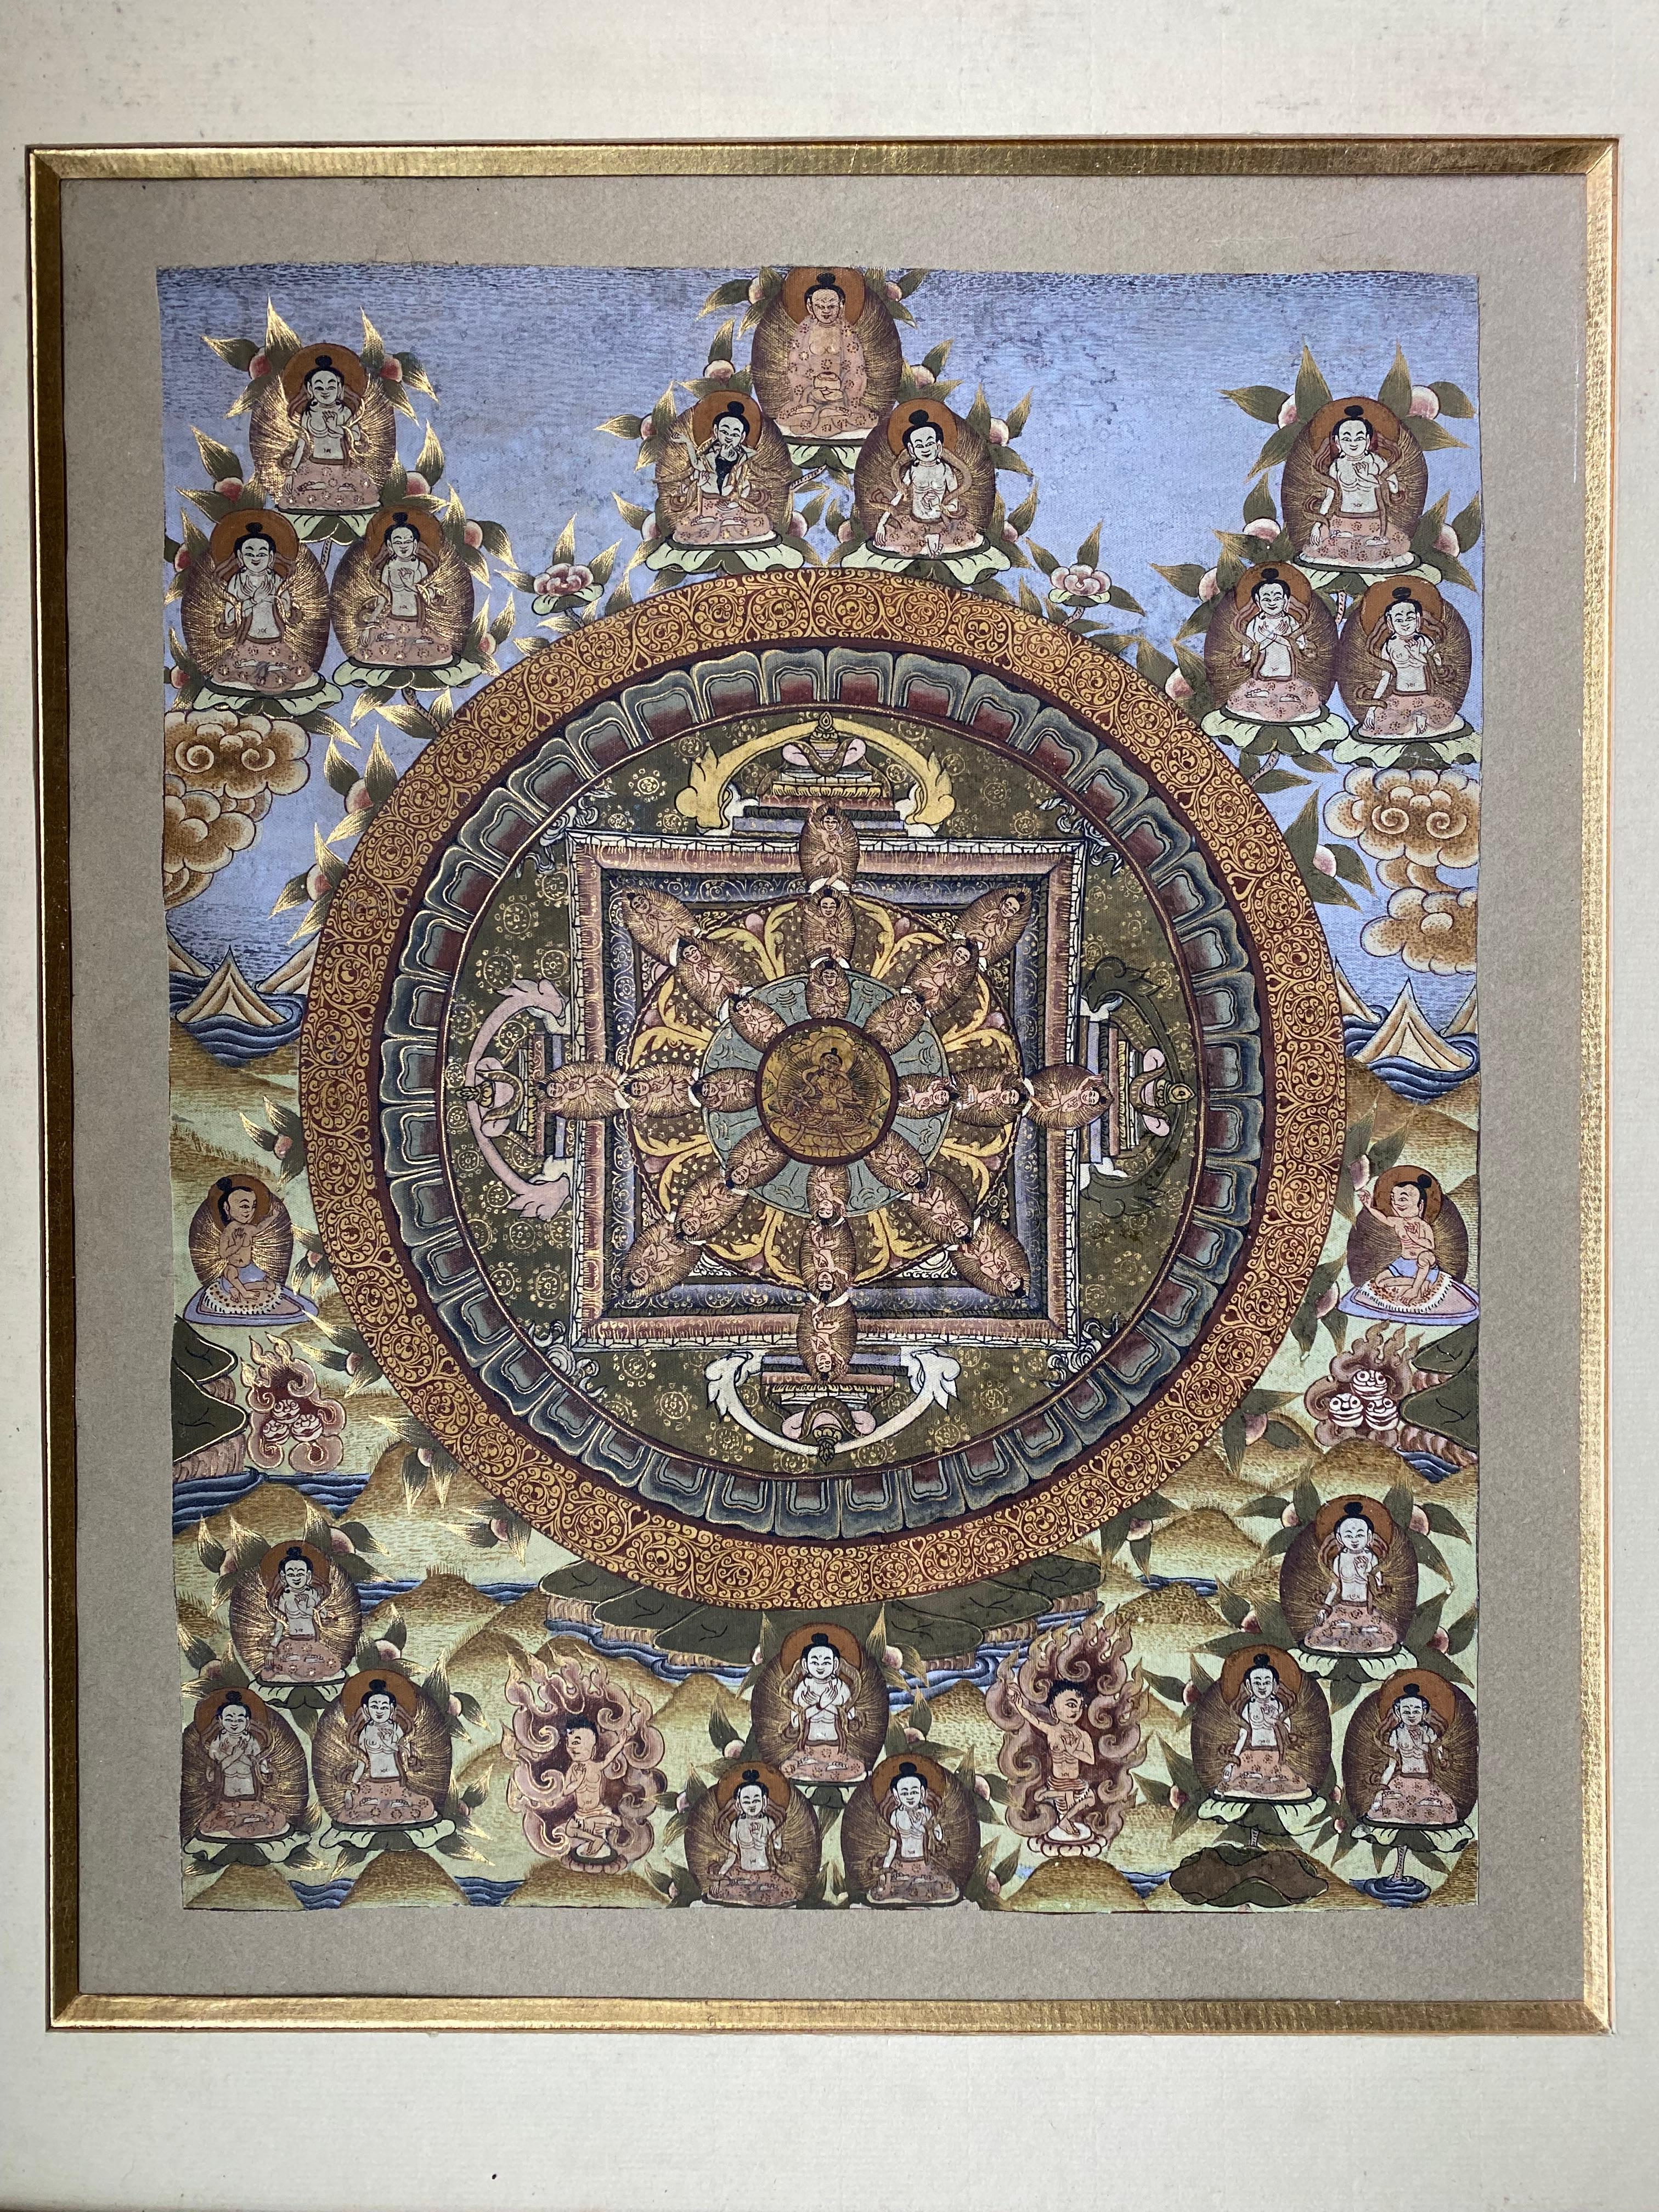 Very beautiful tanka mandala of the 19th century painted on canvas . Buddha is in the center with the naga on his right arm, surrounded by others arranged like the rays of the sun. They are all in a circle with golden decoration and geometric